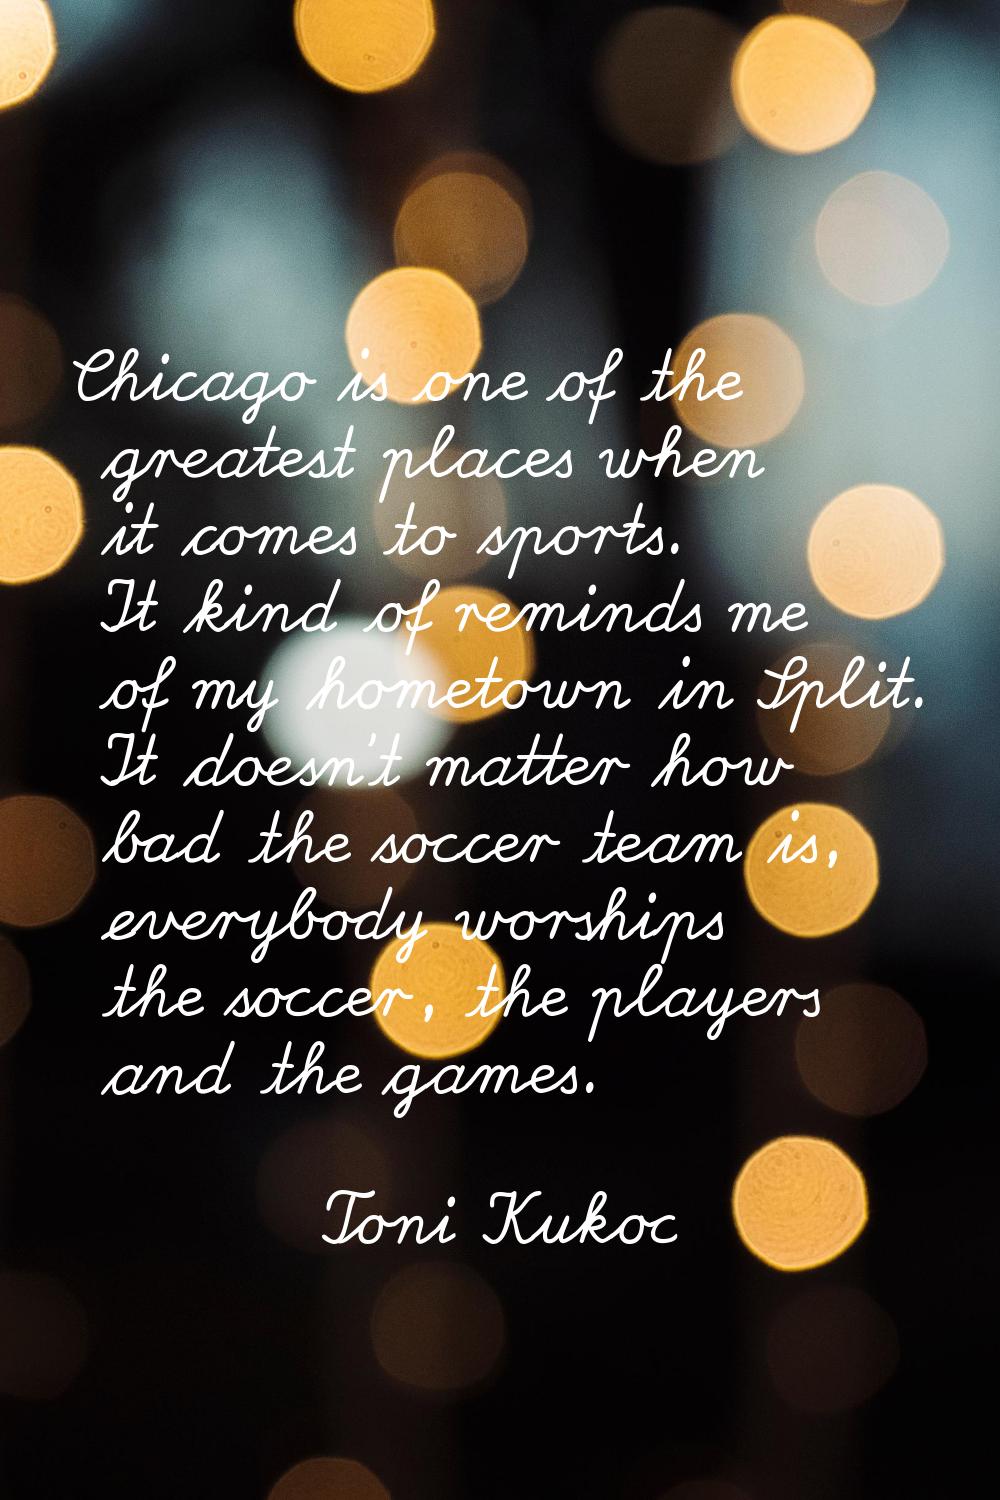 Chicago is one of the greatest places when it comes to sports. It kind of reminds me of my hometown